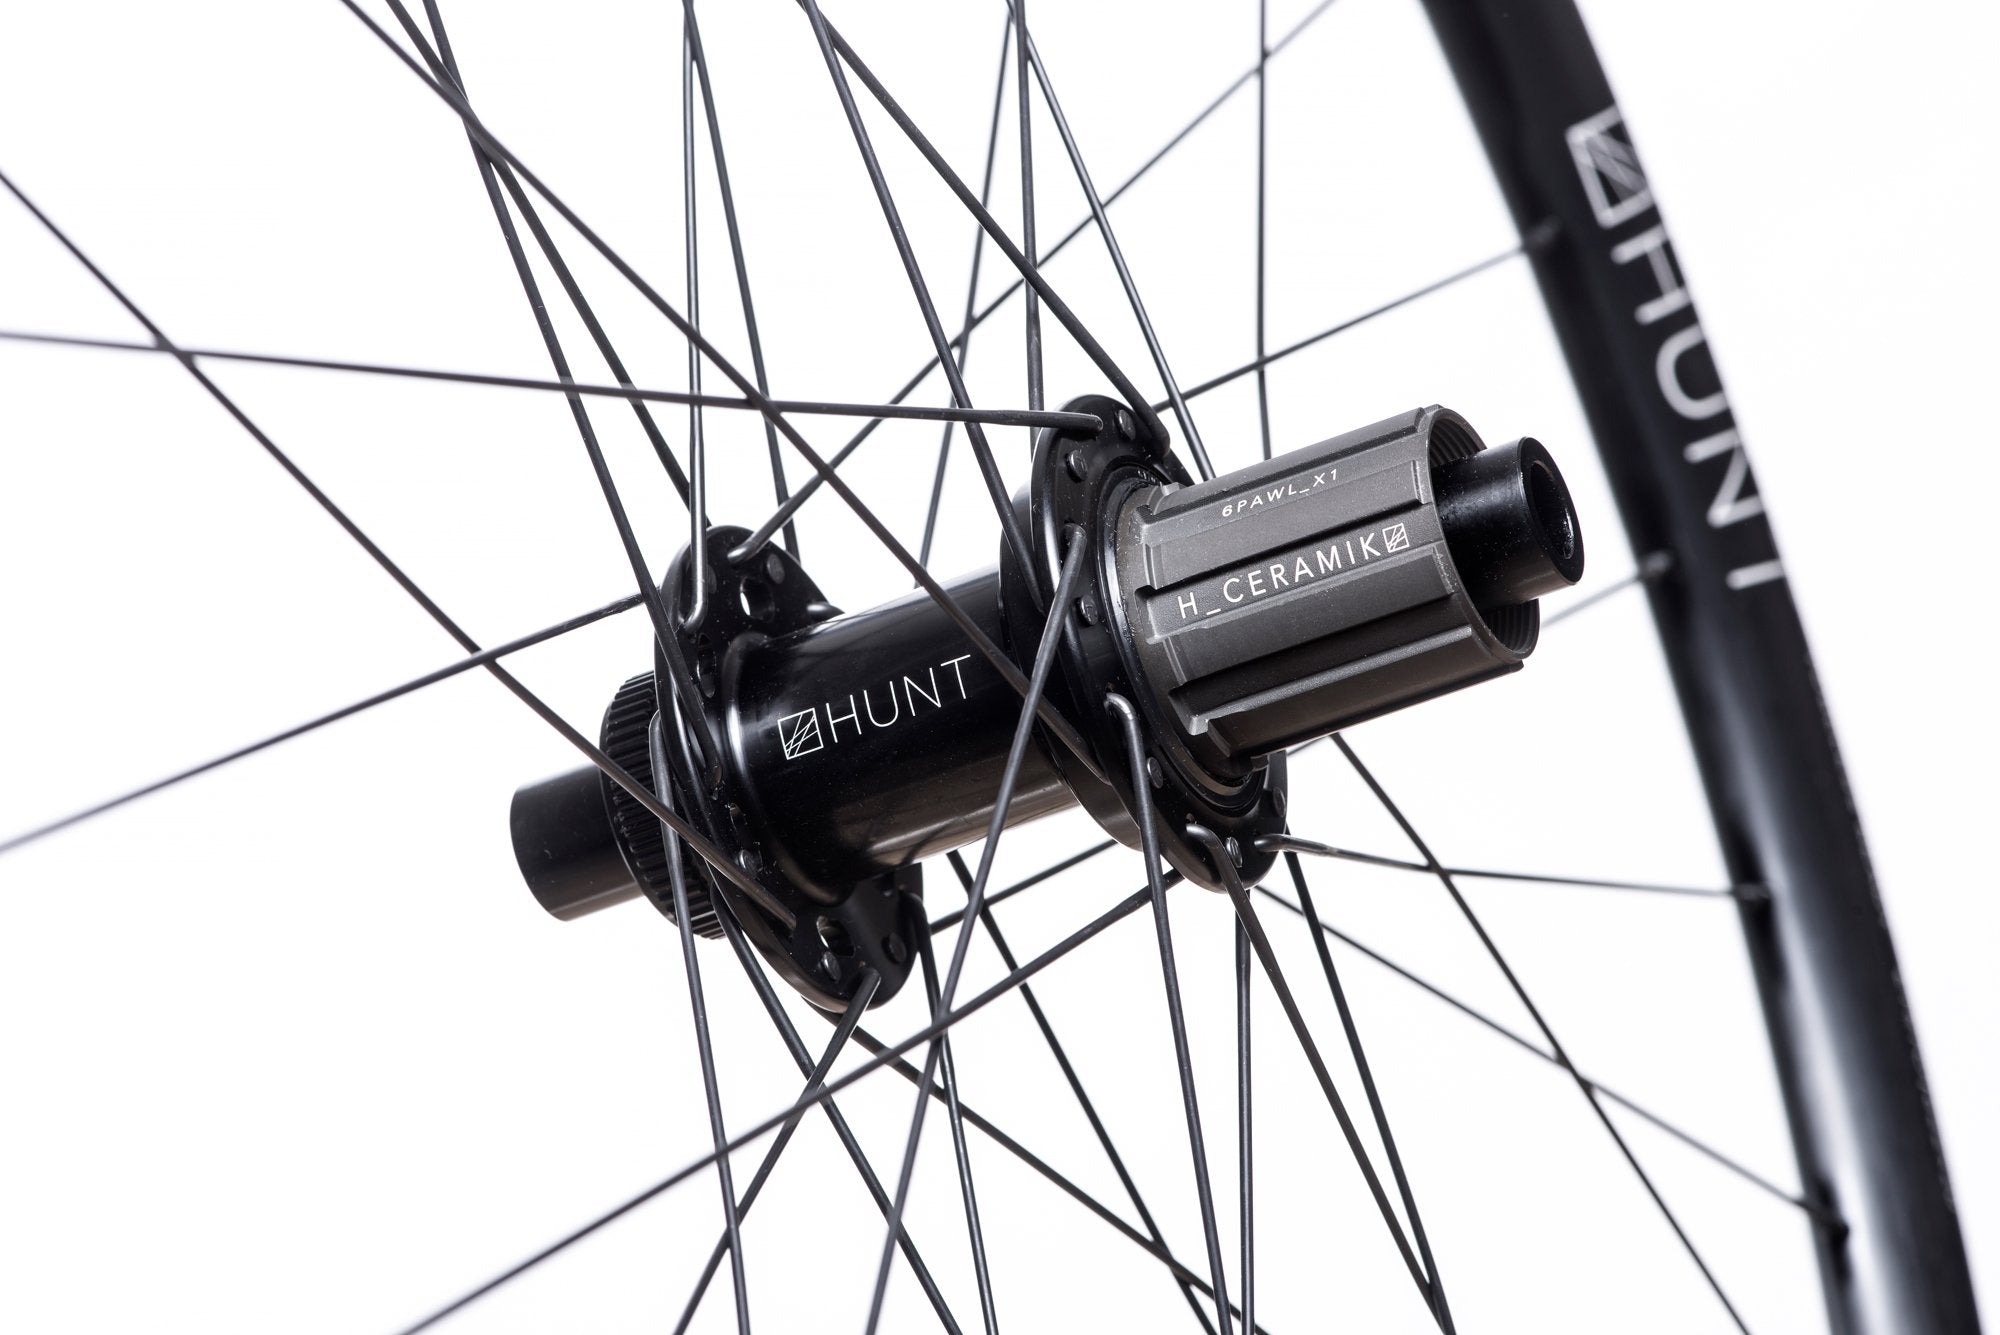 <html><h1>Freehub Body</h1><i>Durability is a theme for HUNT as time and money you spend fixing is time and money you cannot spend riding or upgrading your bikes. As a result, we've developed the <em>H_CERAMIK</em> coating to provide excellent durability and protect against cassette sprocket damage often seen on standard alloy freehub bodies.</i></html>